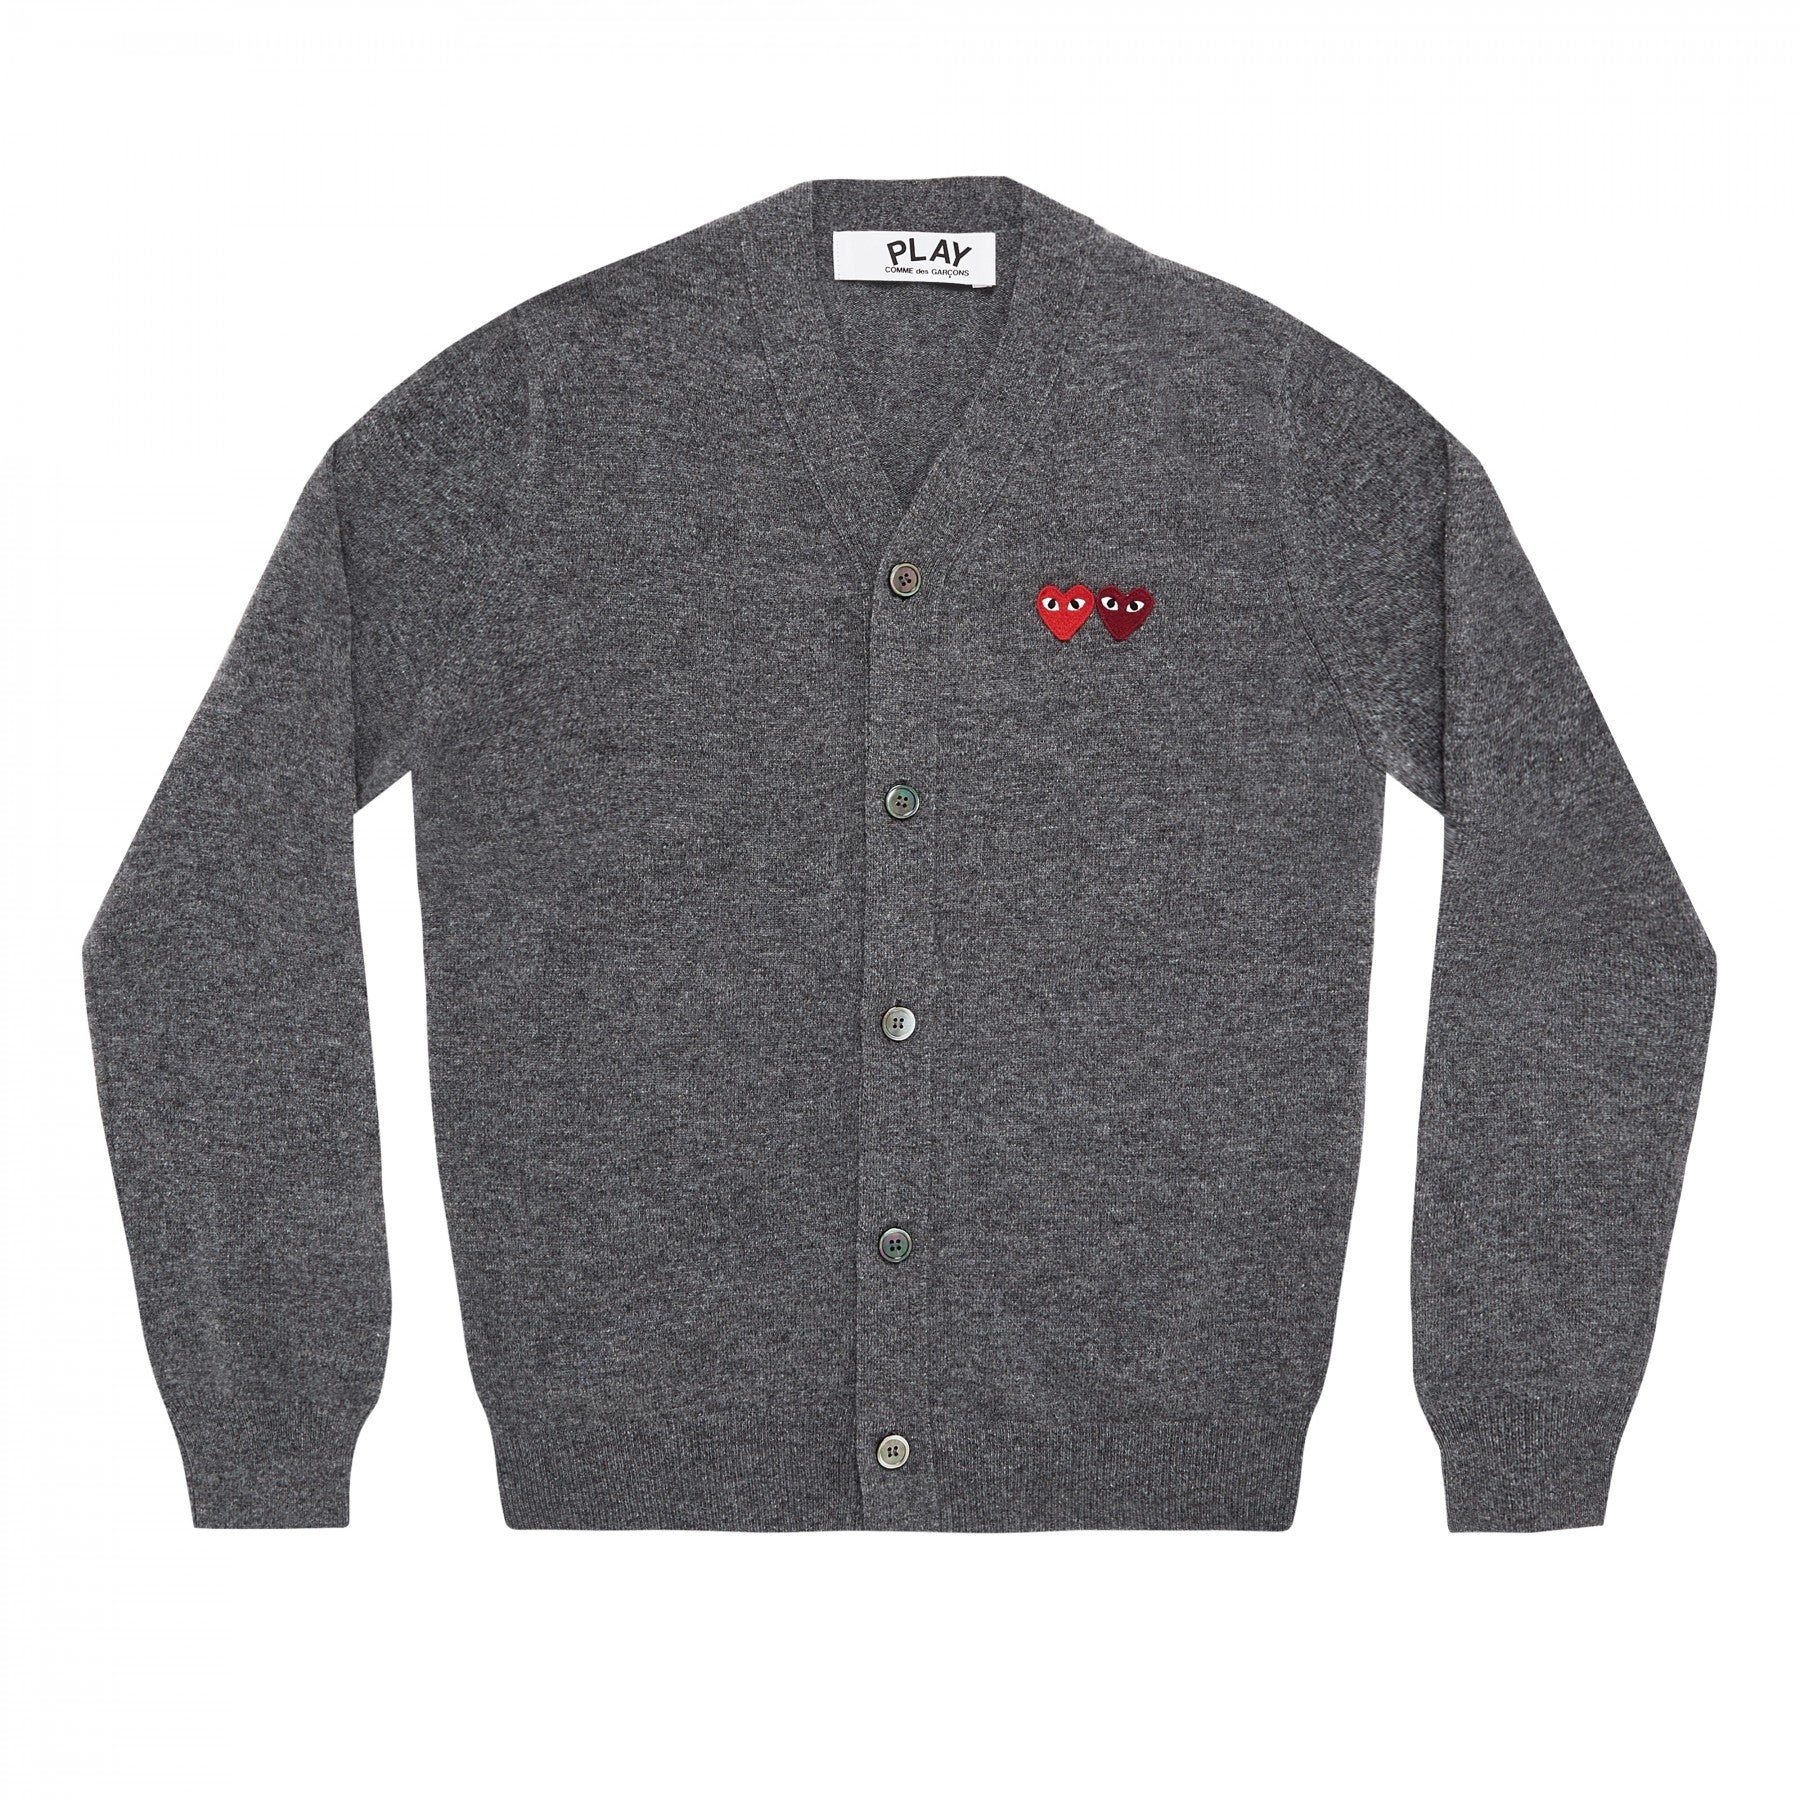 PLAY Men's Cardigan with Double Emblems Grey